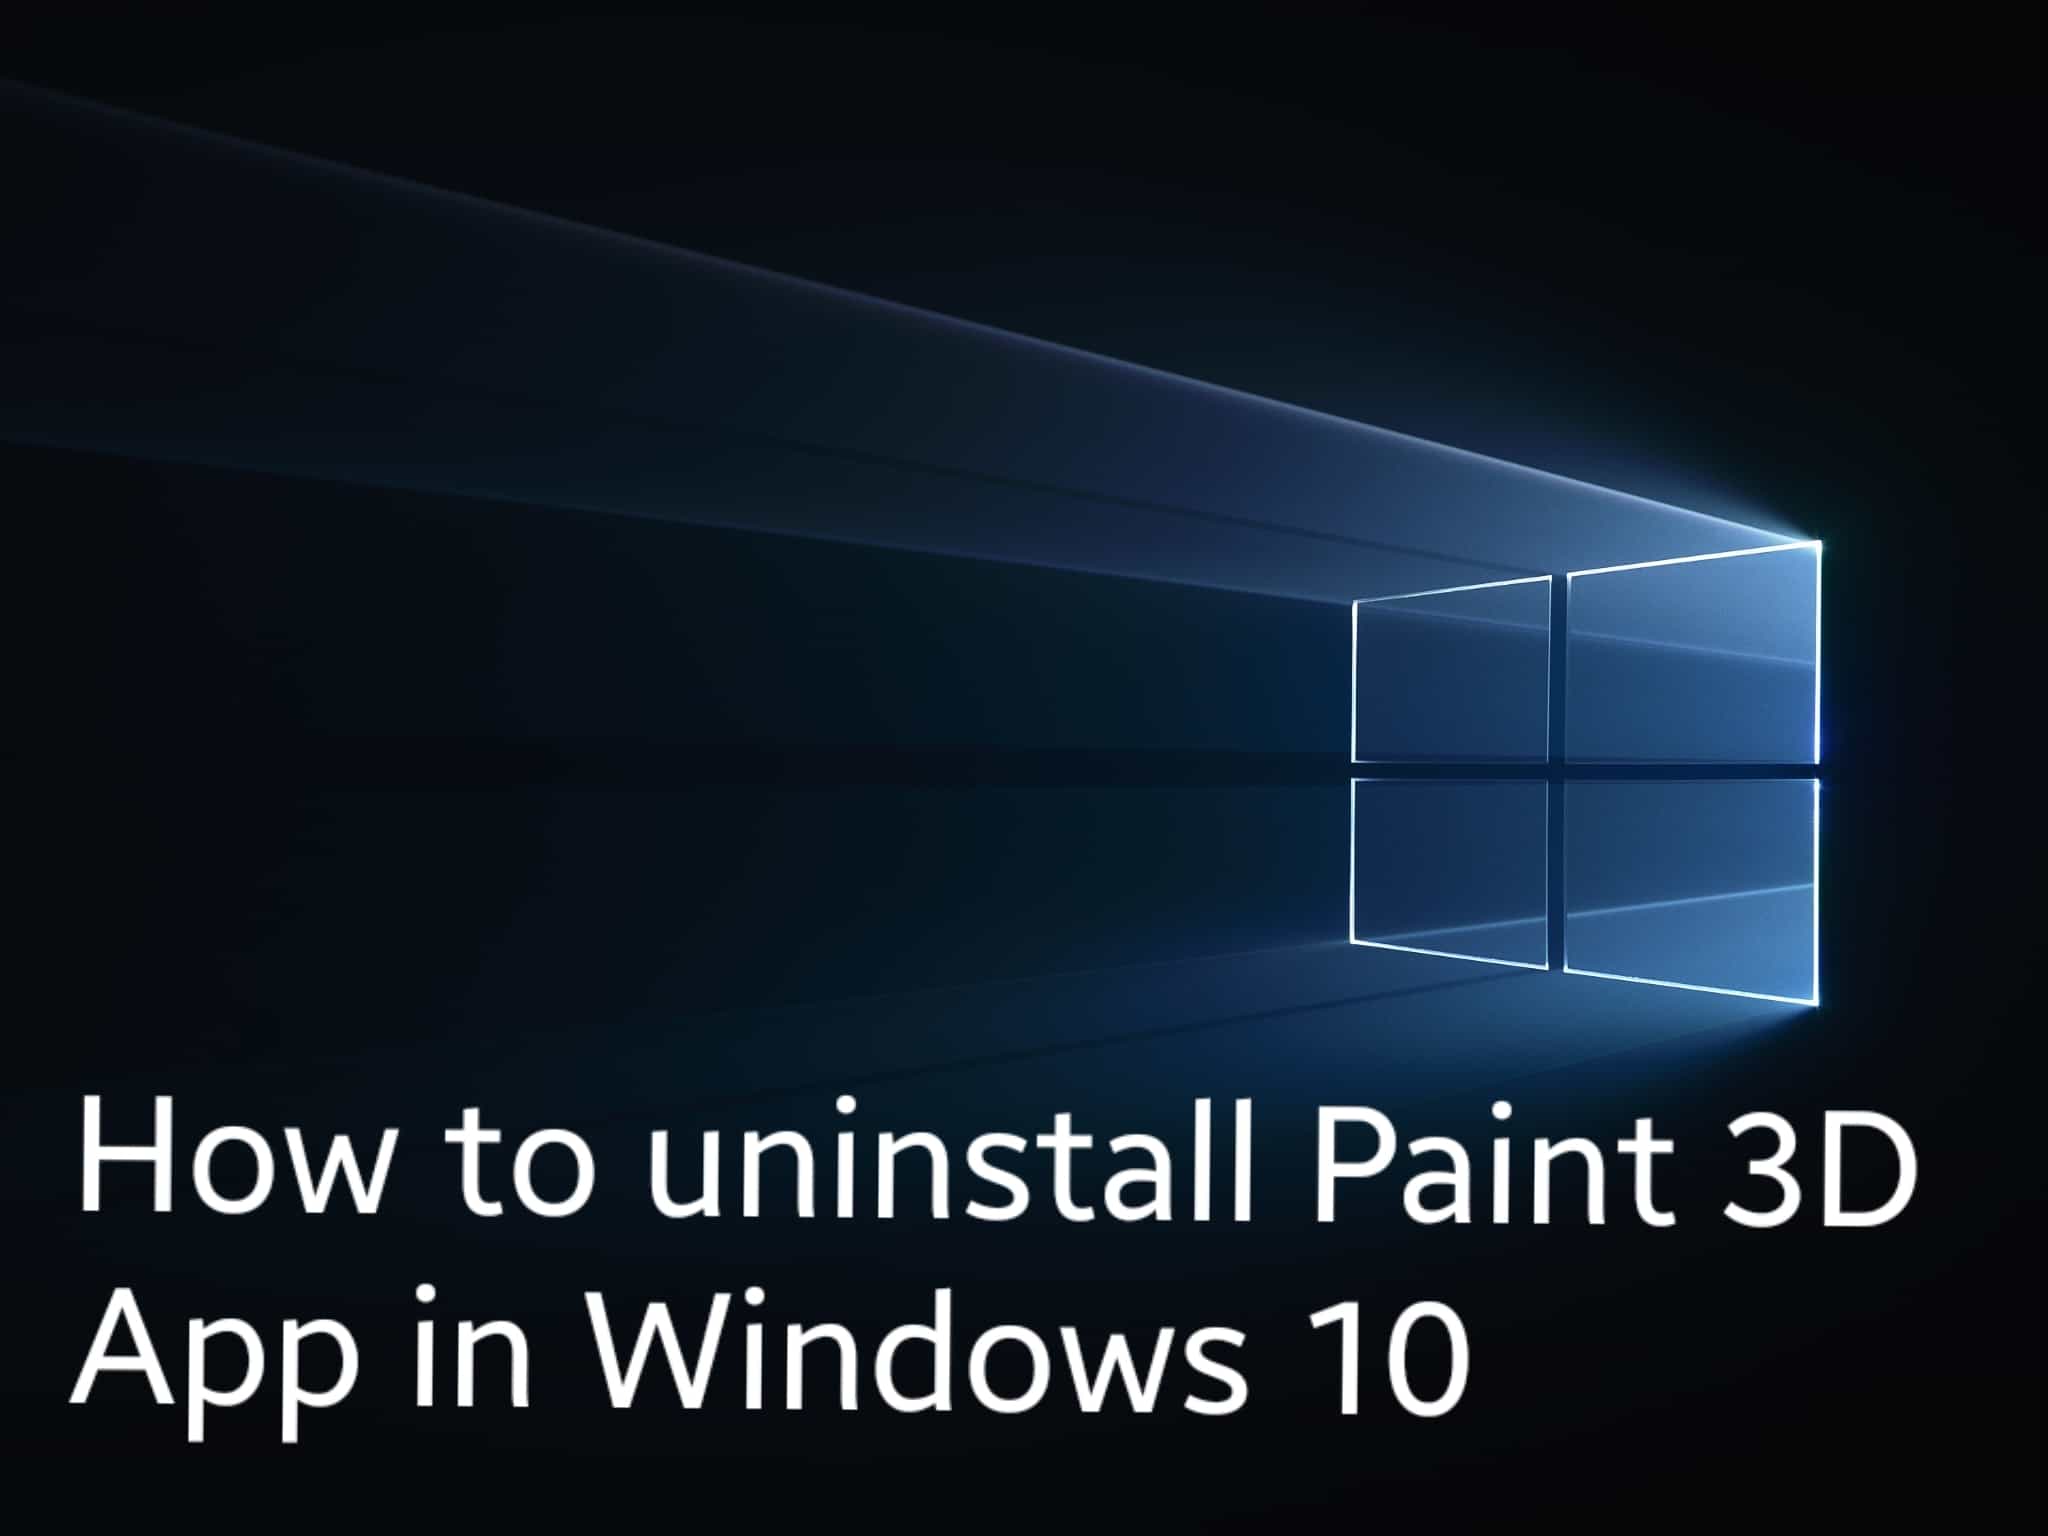 How to uninstall Paint 3D App in Windows 10